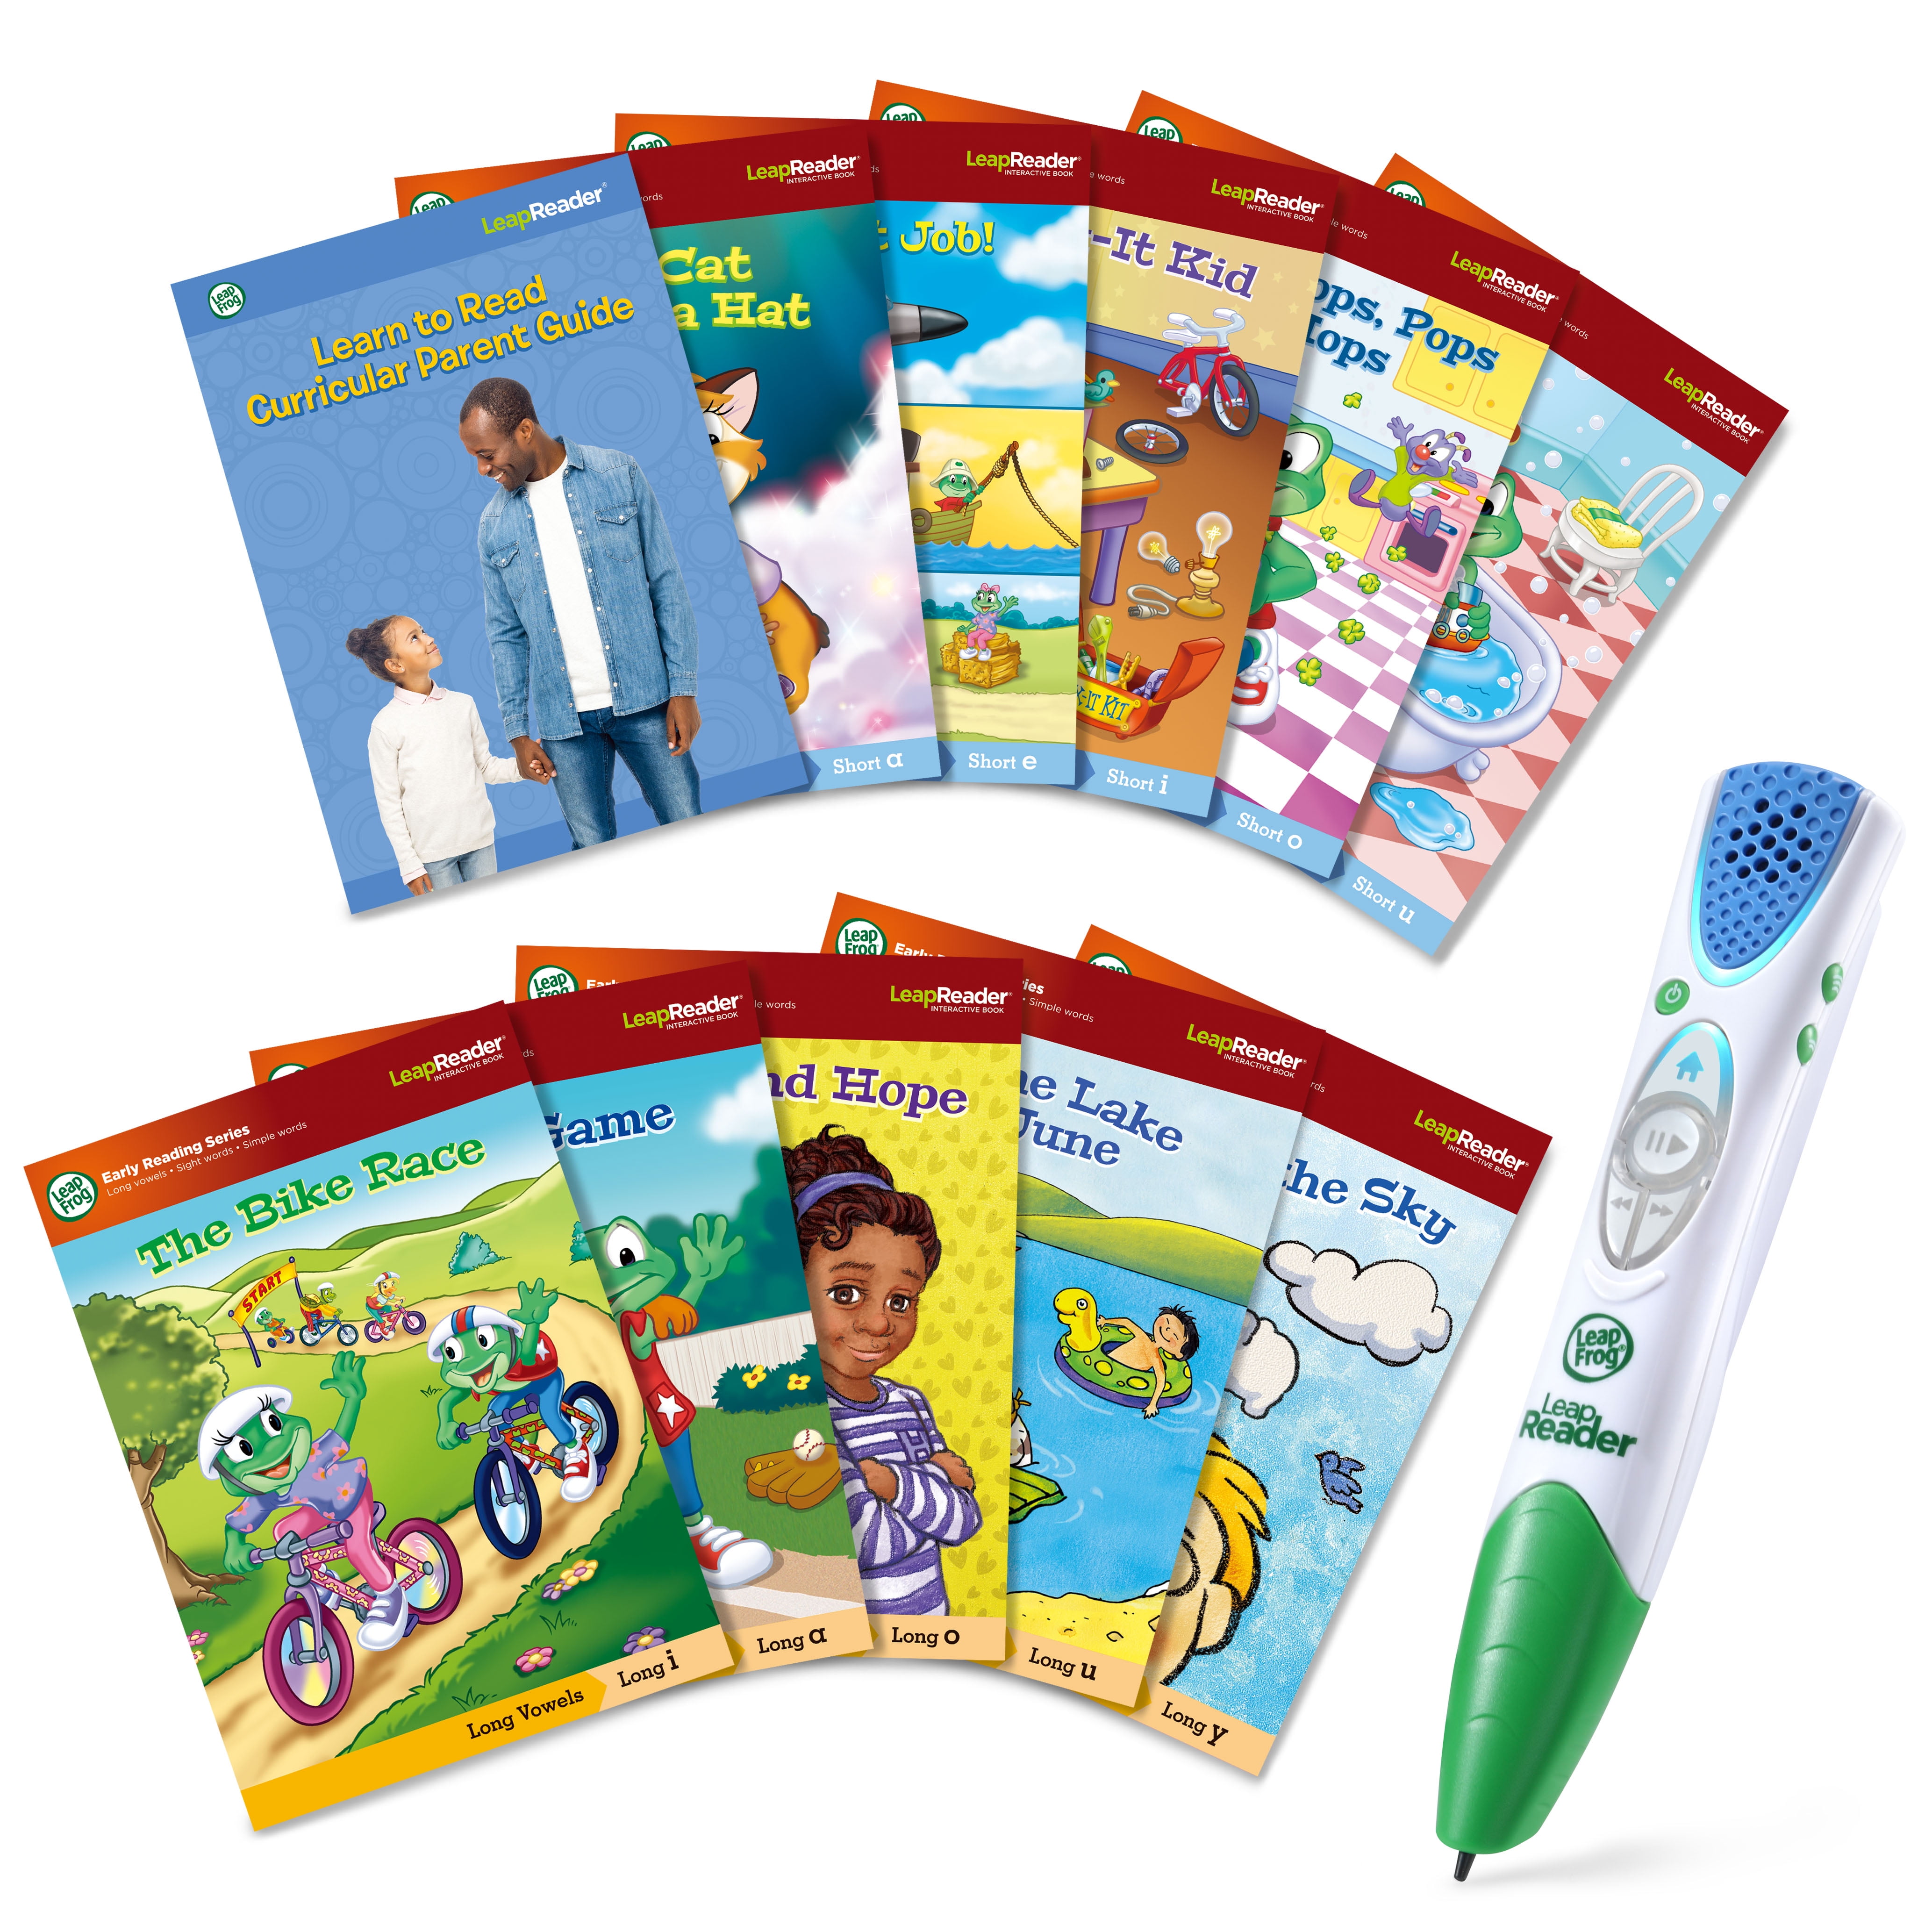 LEAPFROG TAG or LEAPREADER & Junior BOOKS $3.99 when you buy 4 or more Books 